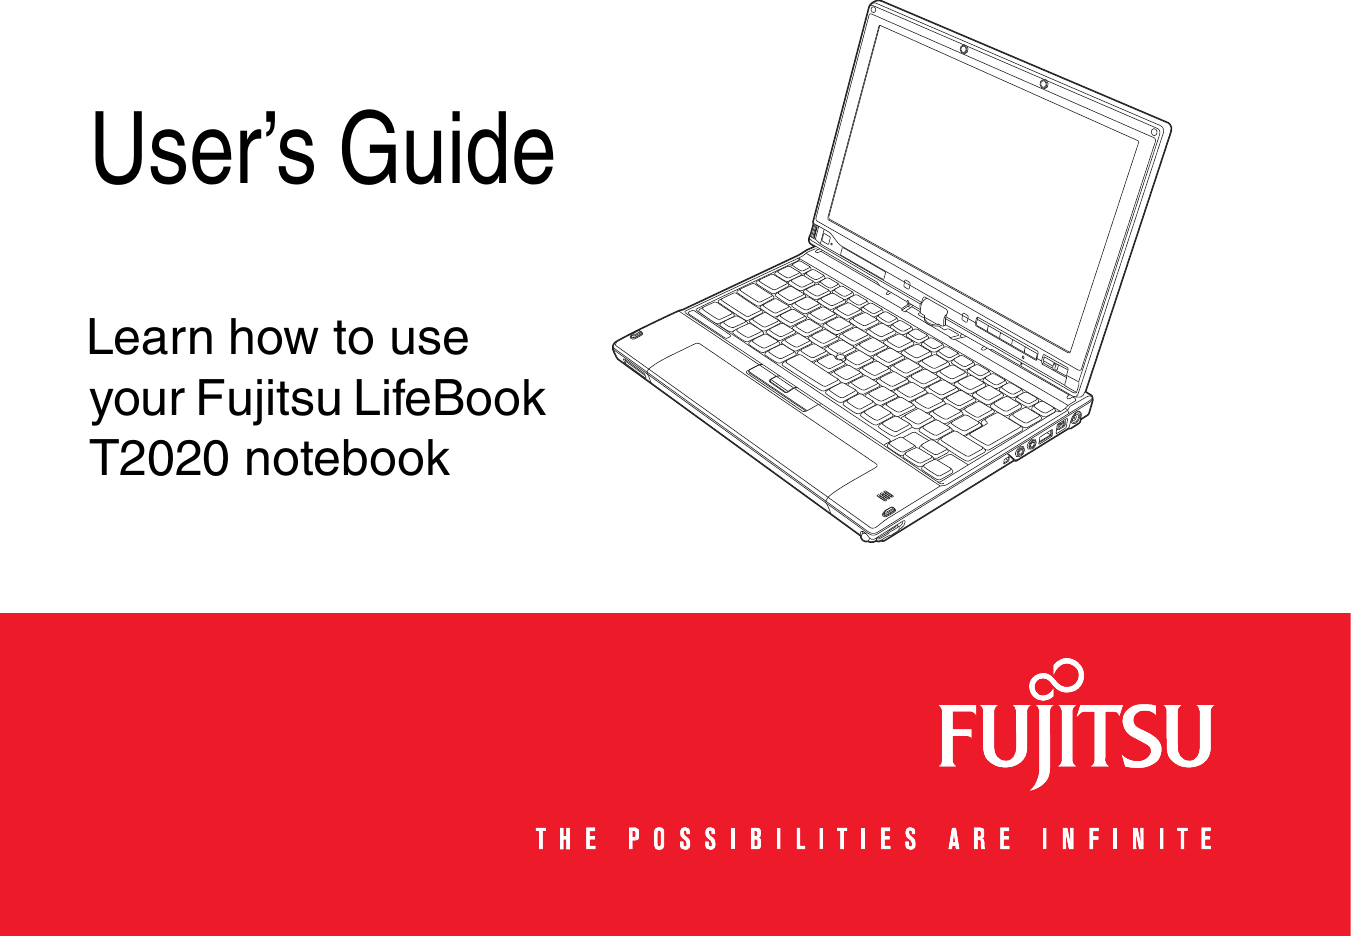   User’s GuideLearn how to use your Fujitsu LifeBook T2020 notebook